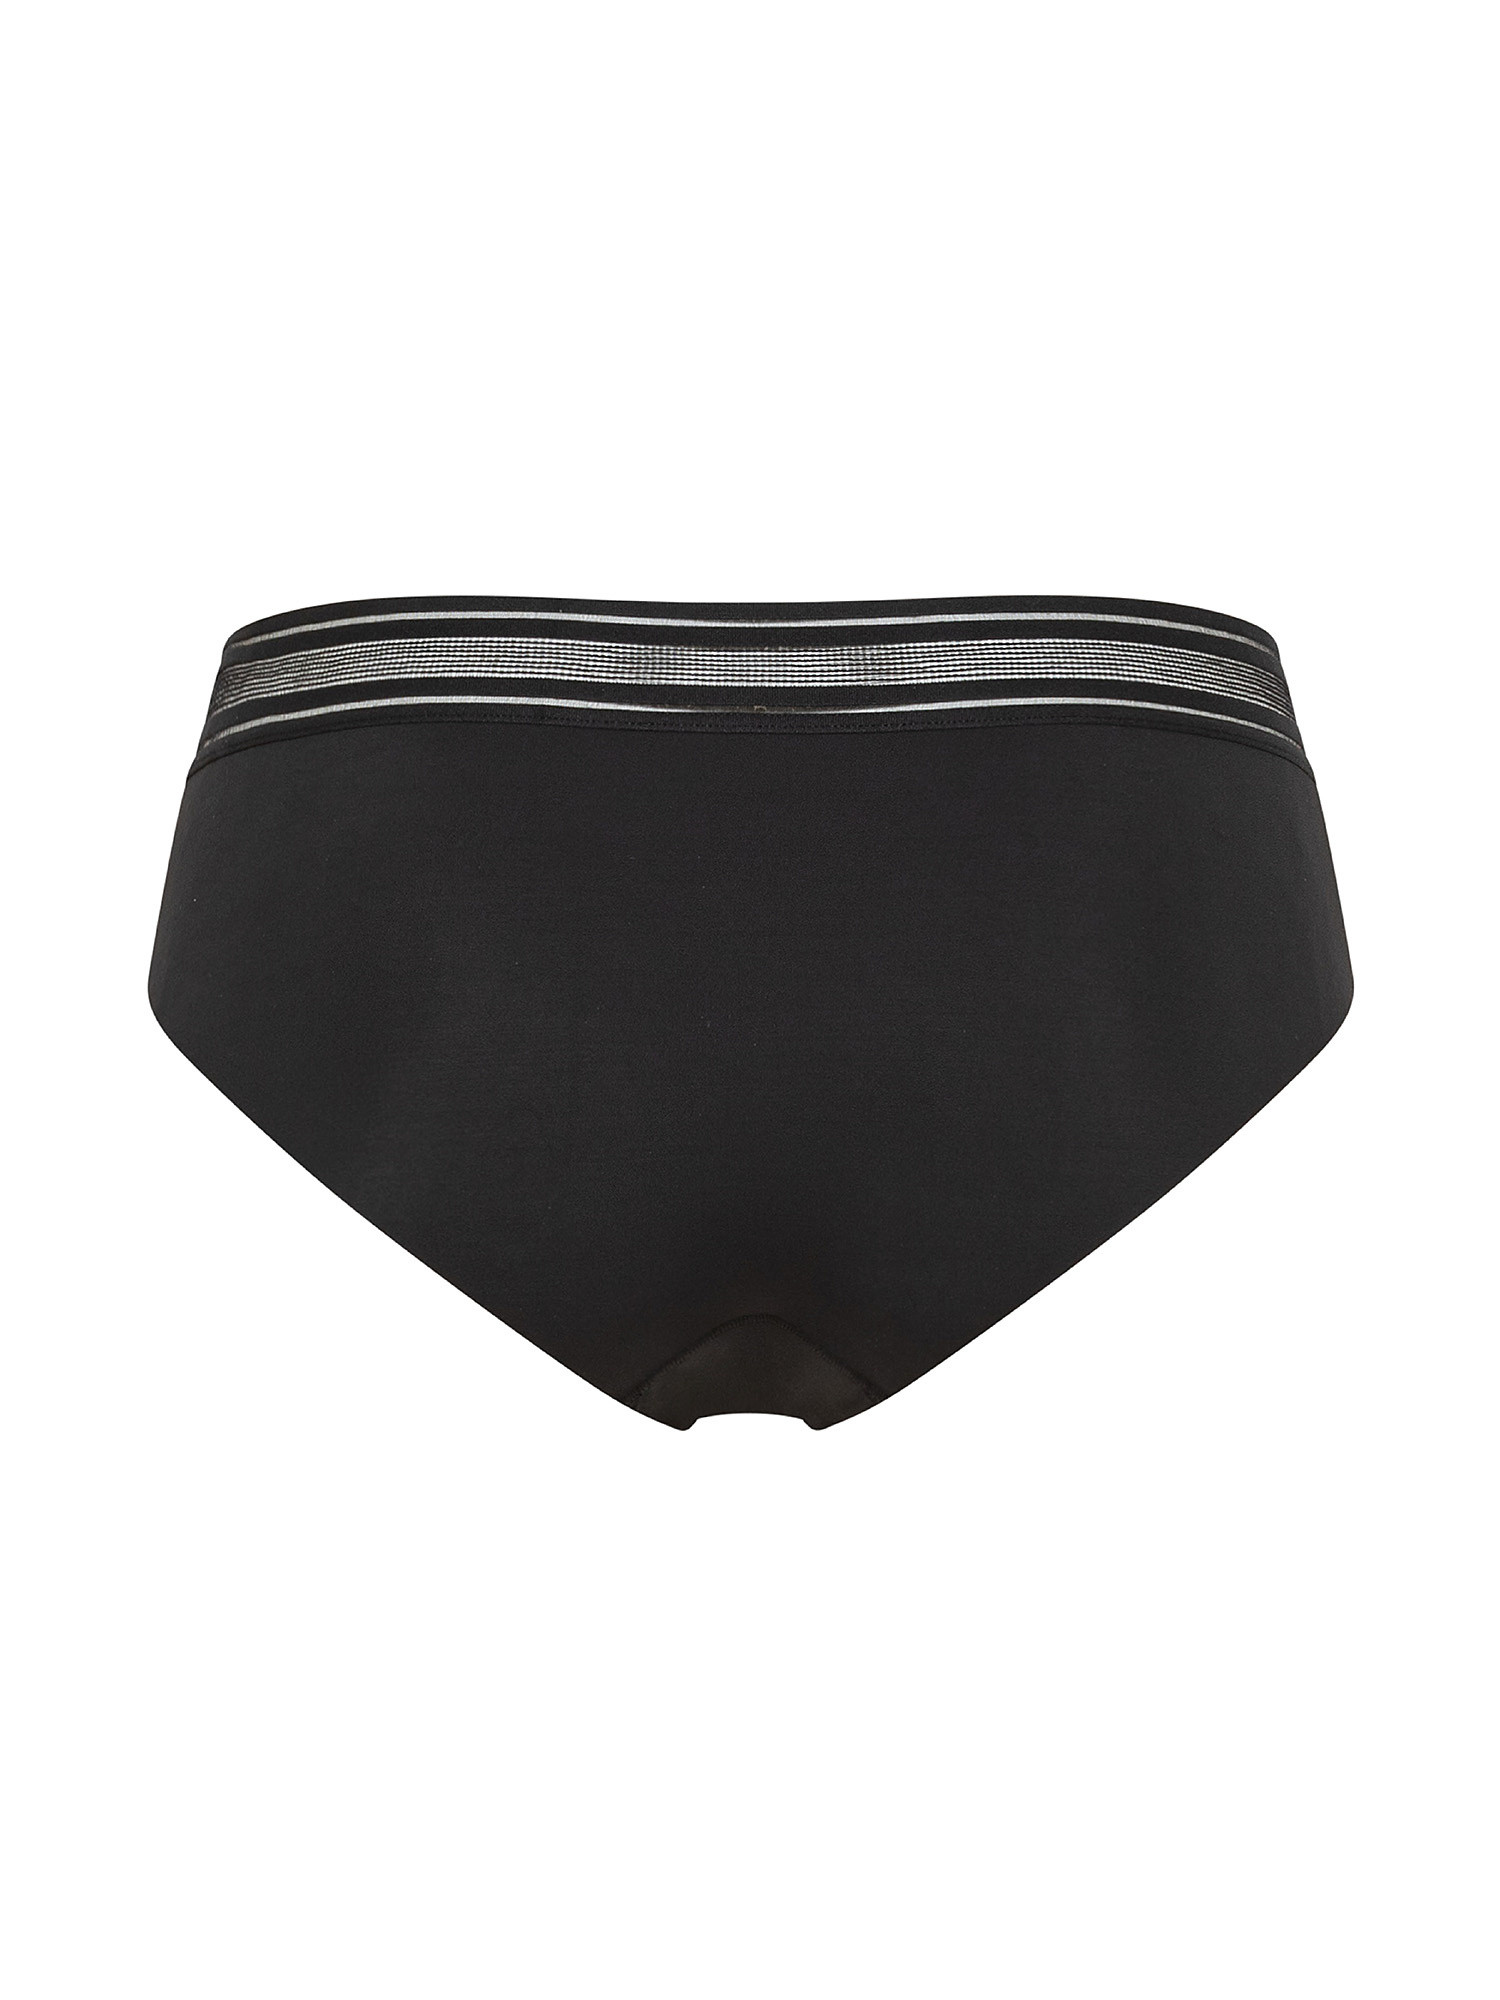 Briefs with graphic elastic band, Black, large image number 1